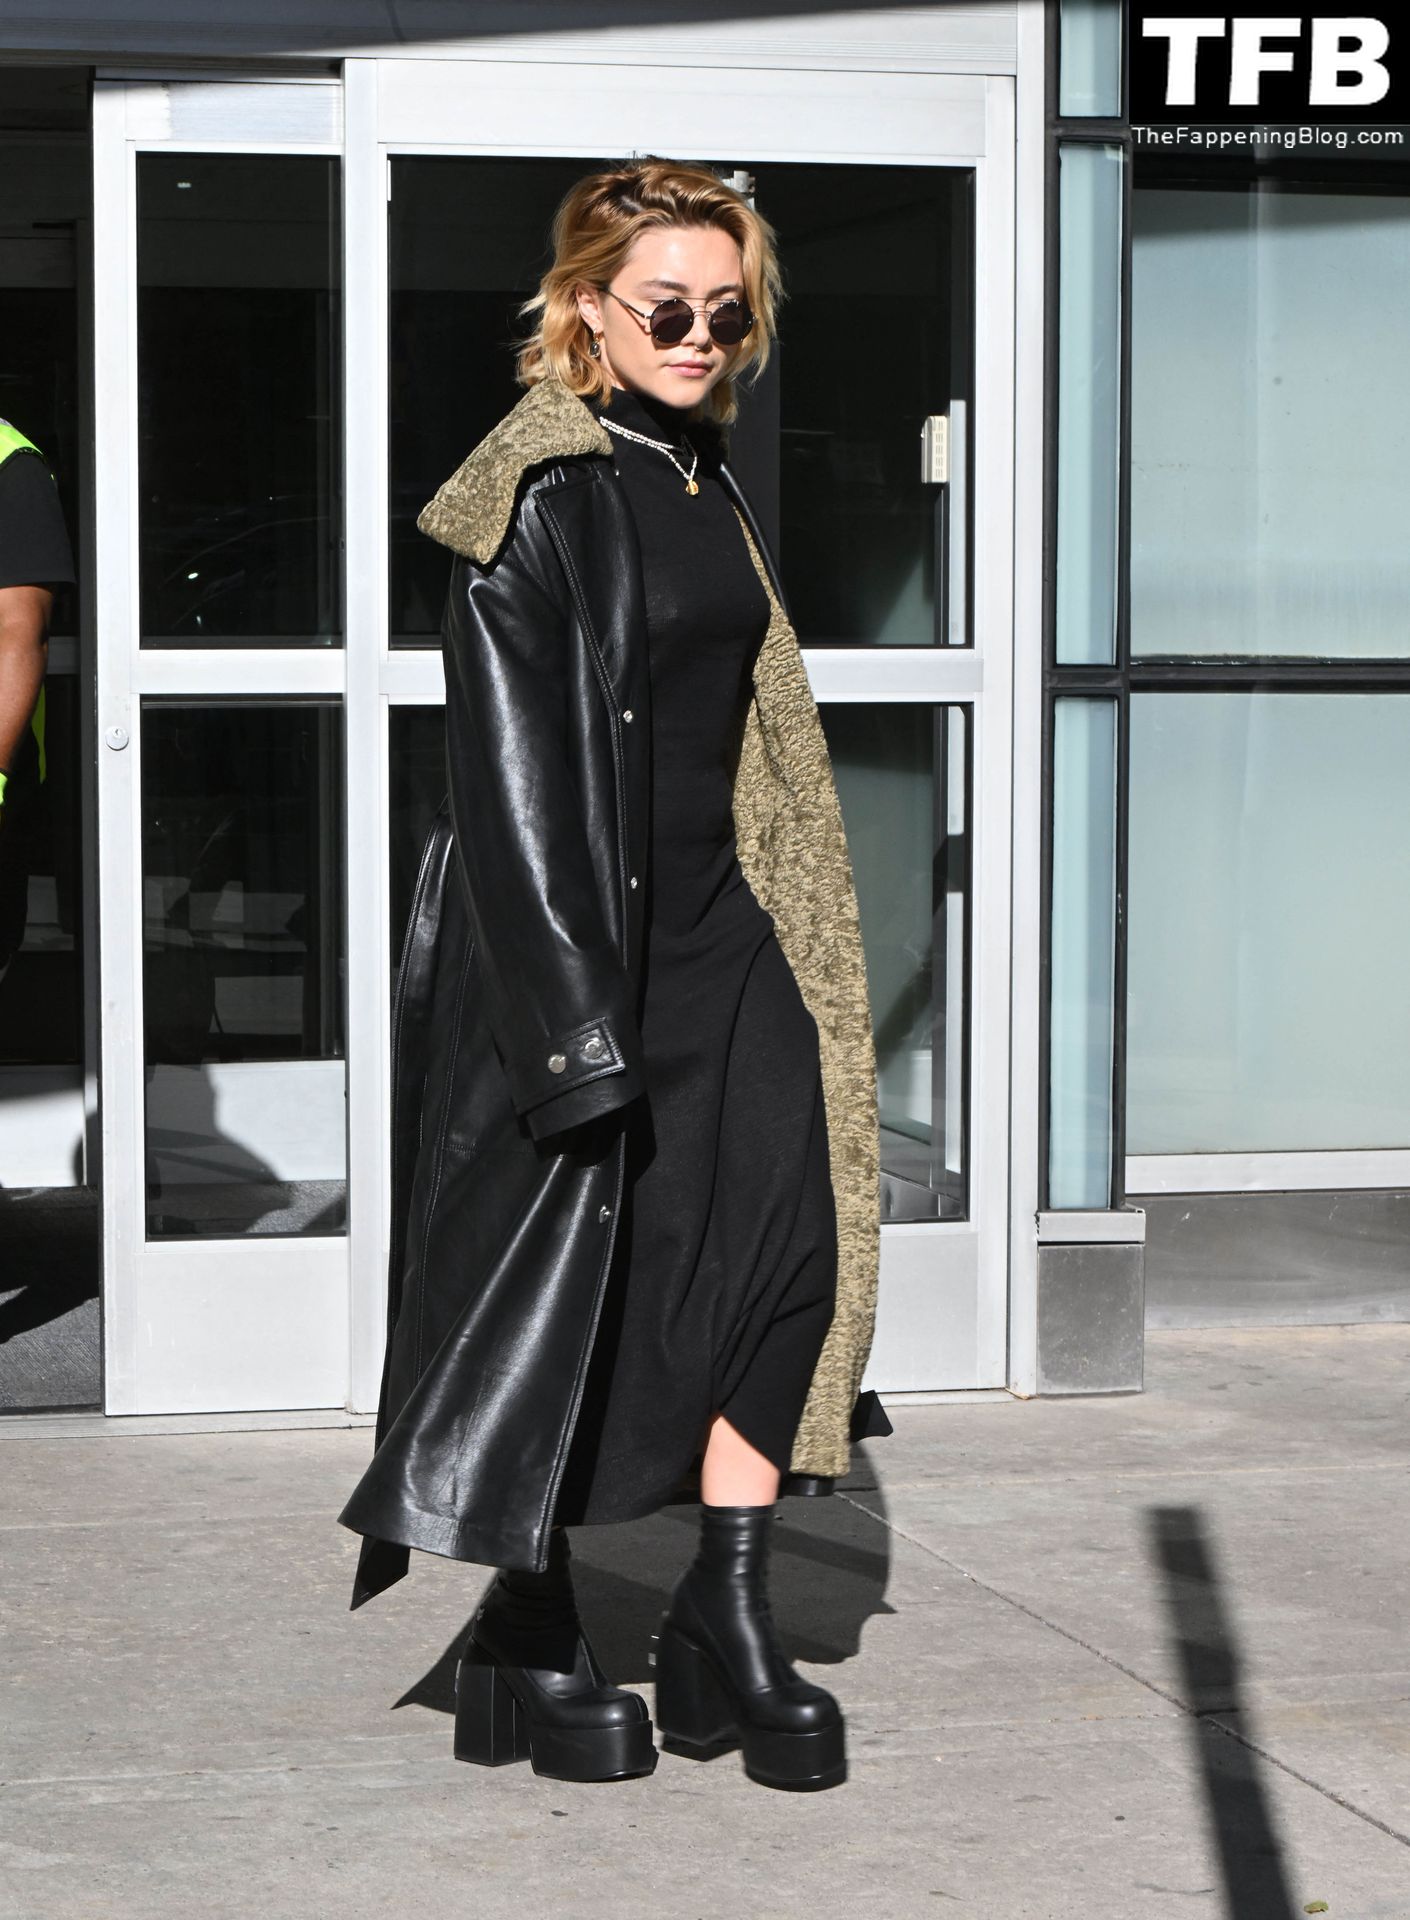 Florence Pugh Pokies The Fappening Blog 4 - Florence Pugh Shows Off Her Pokies at JFK airport in NYC (31 Photos)